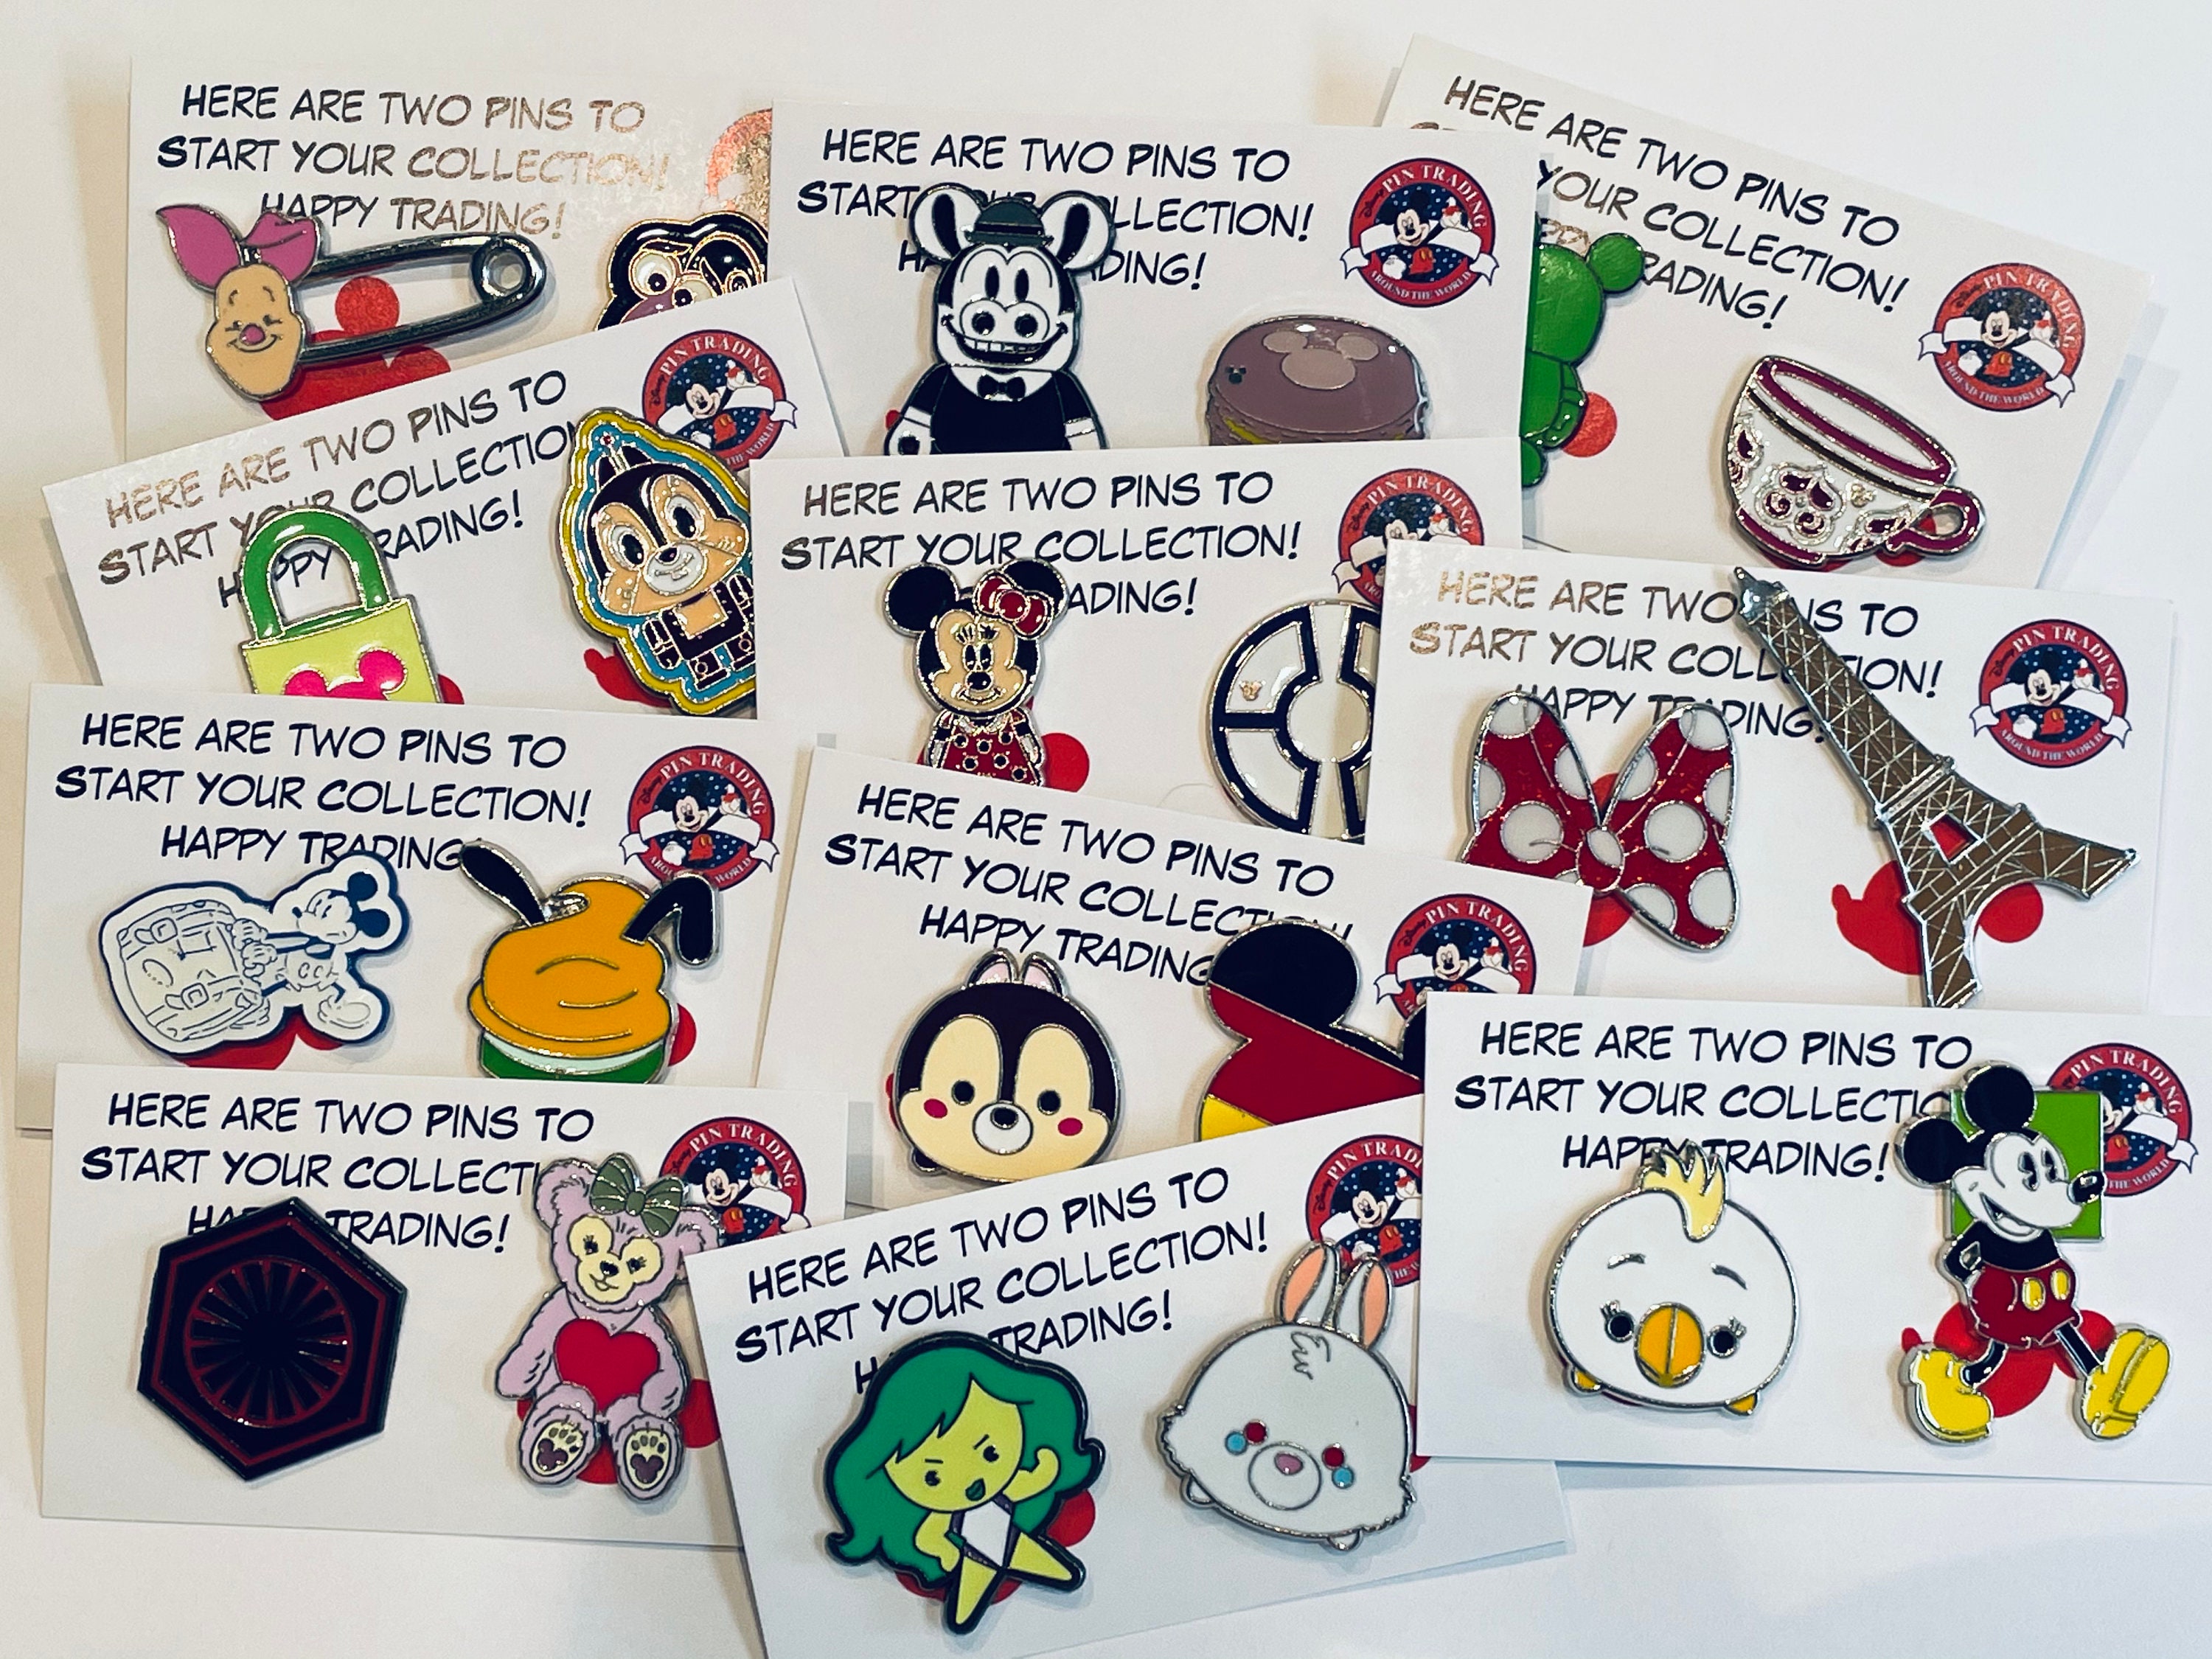 With over 14 years of Disney pin trading, this collector has made